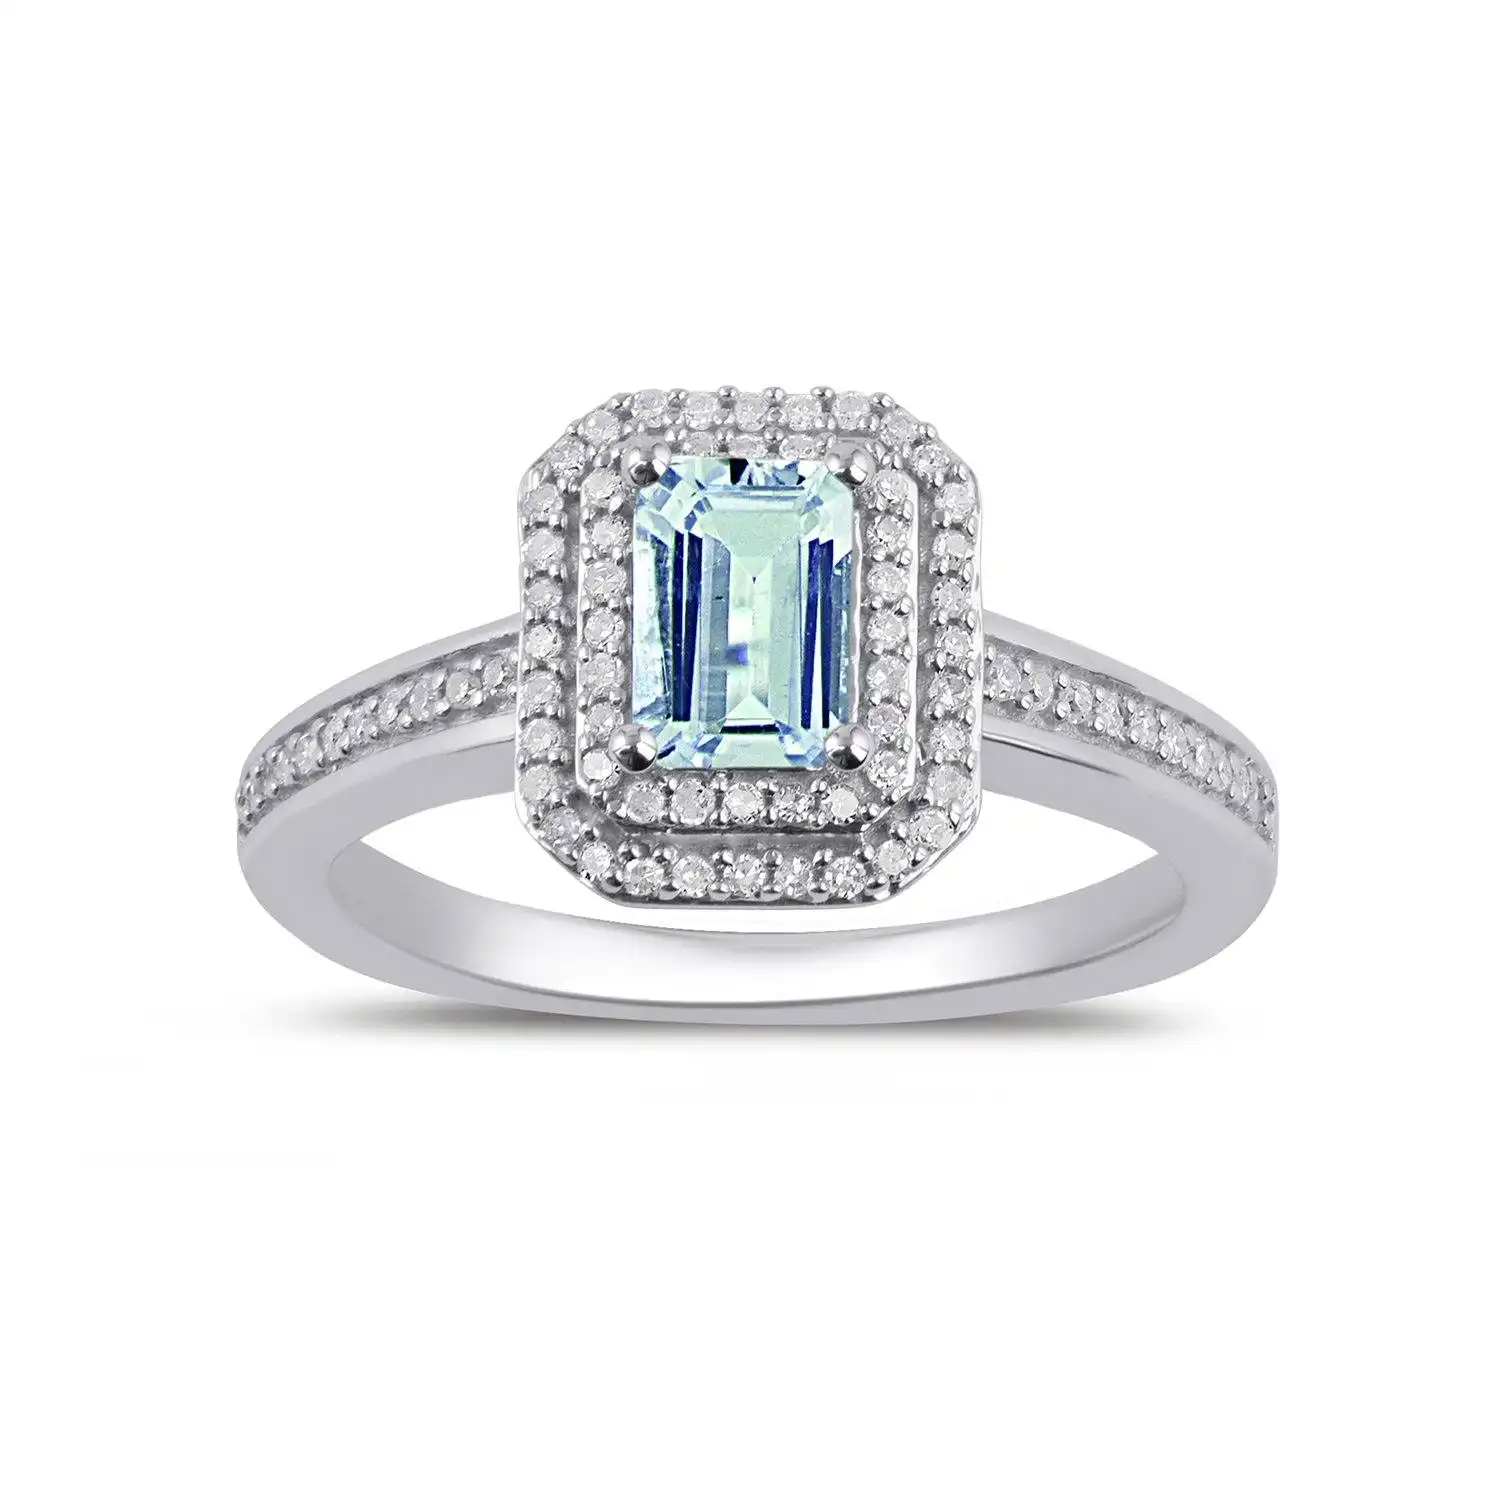 Mirage Double Halo Aquamarine Ring with 1/5ct of Diamonds in Sterling Silver